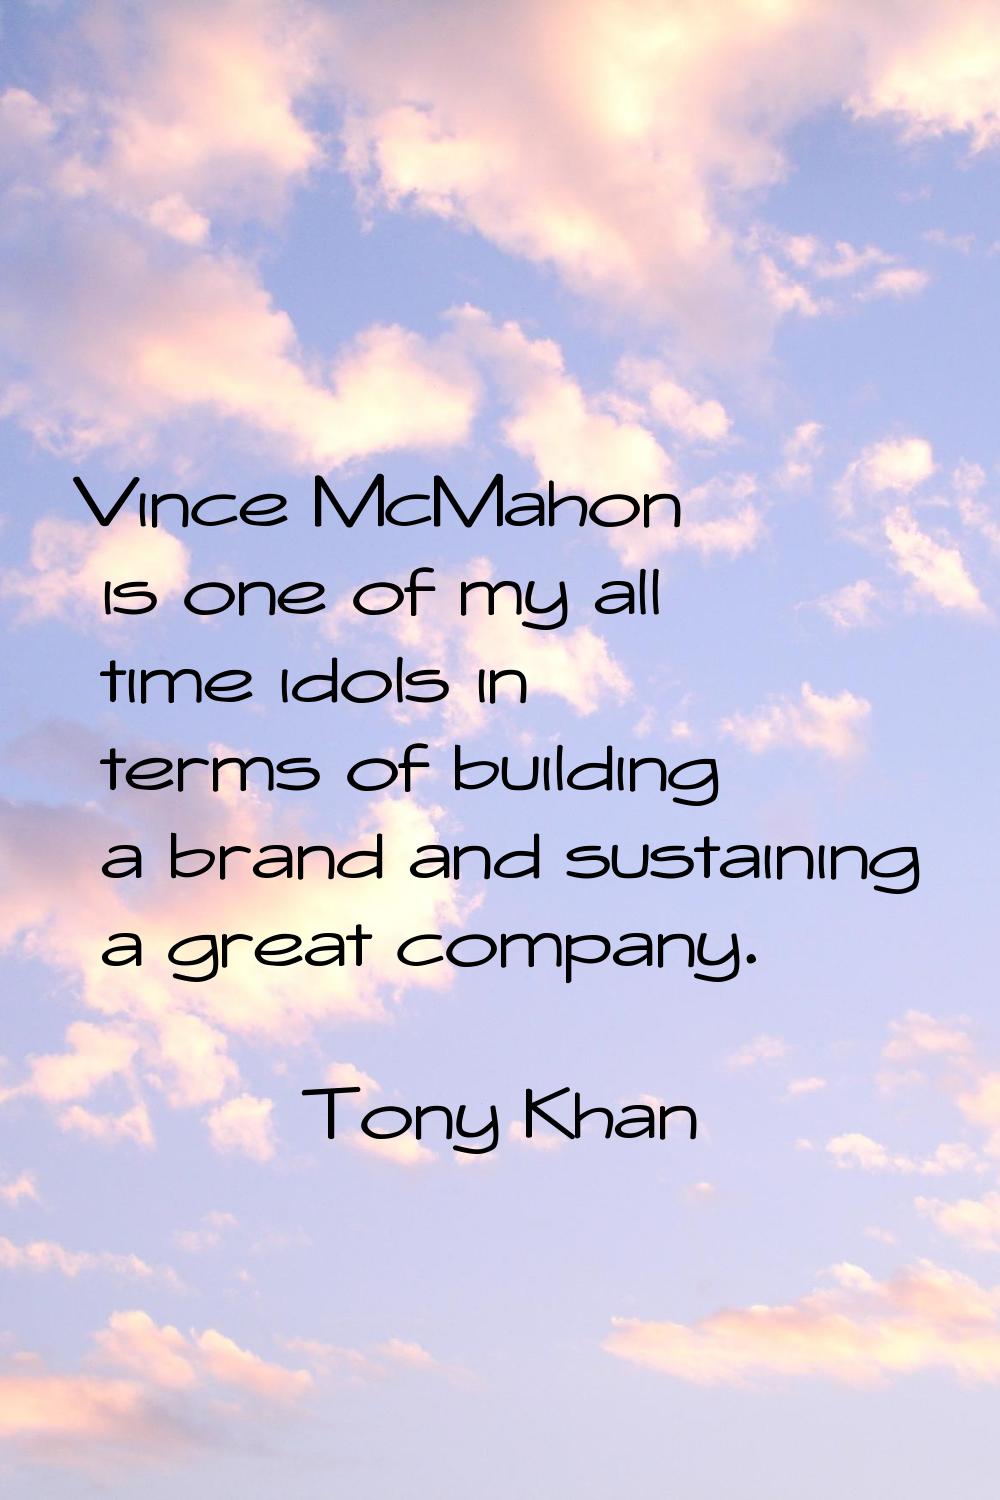 Vince McMahon is one of my all time idols in terms of building a brand and sustaining a great compa